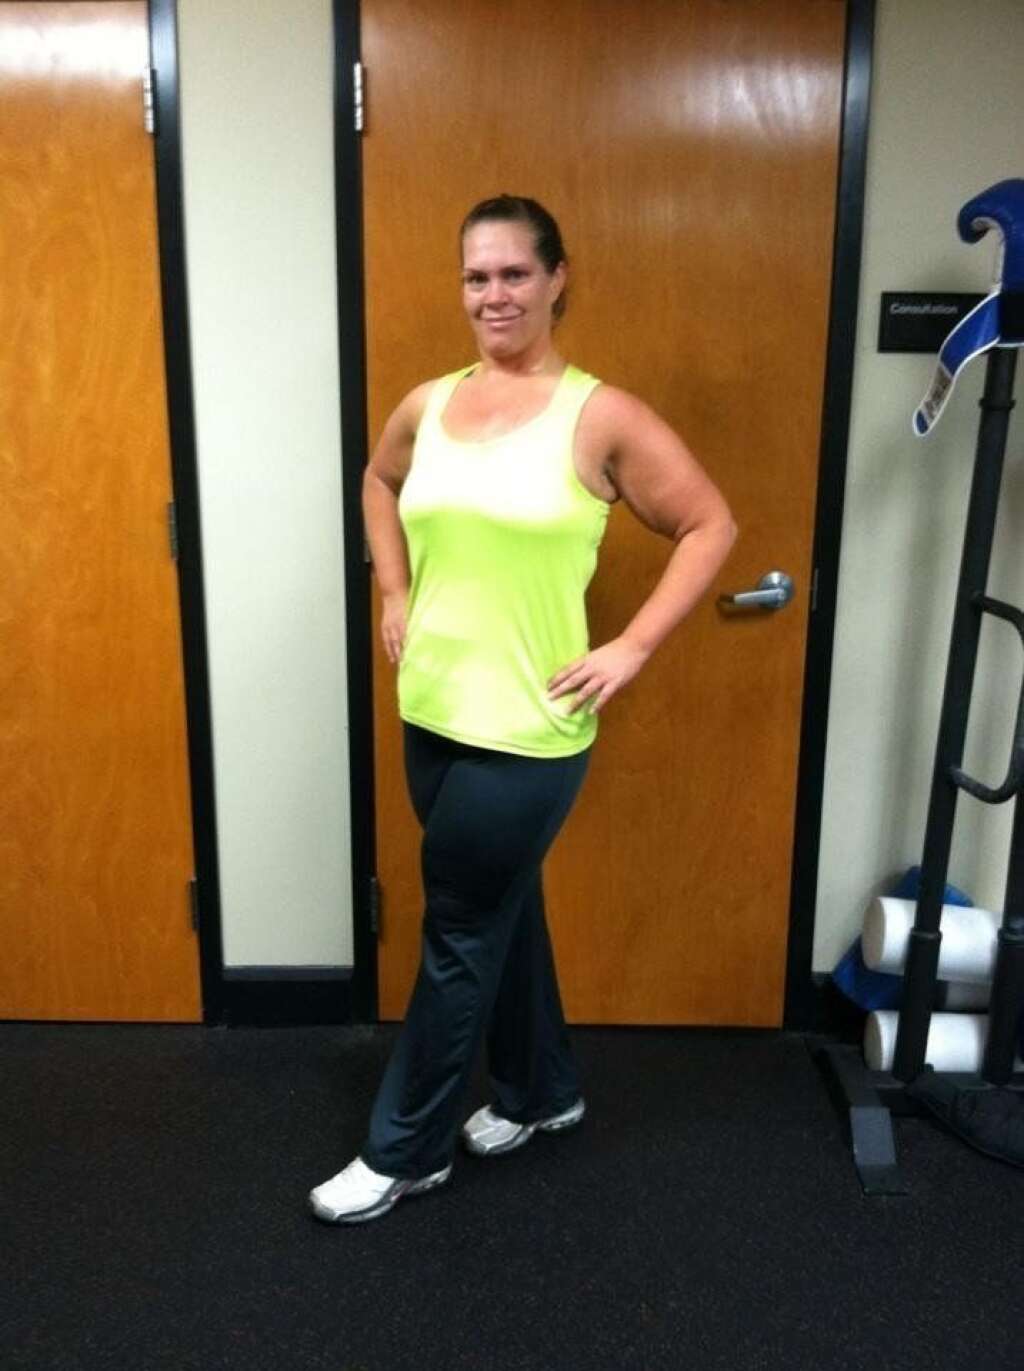 Michelle AFTER - <a href="http://www.huffingtonpost.com/2012/12/18/i-lost-weight-michelle-howard_n_2325046.html">Read Michelle's story here.</a>